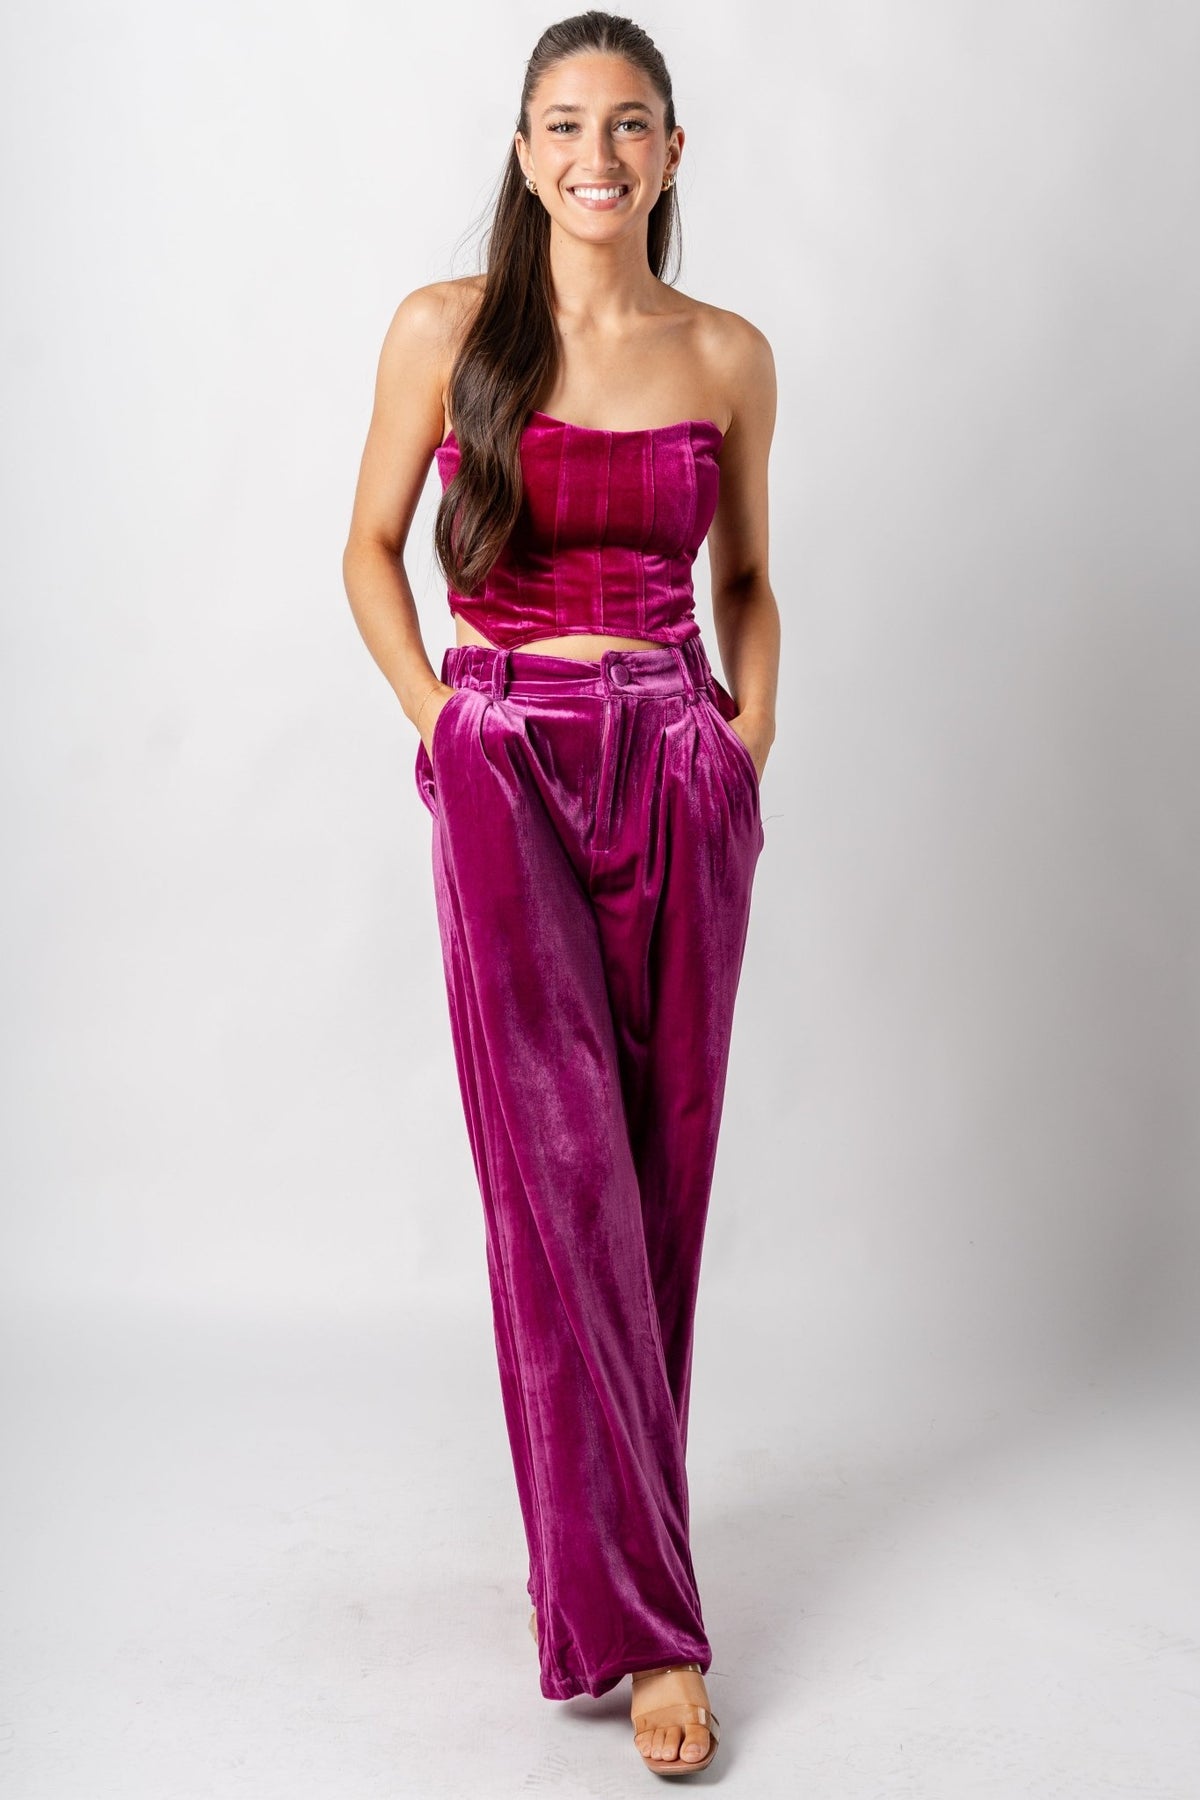 Velvet wide leg pants magenta - Trendy New Year's Eve Outfits at Lush Fashion Lounge Boutique in Oklahoma City